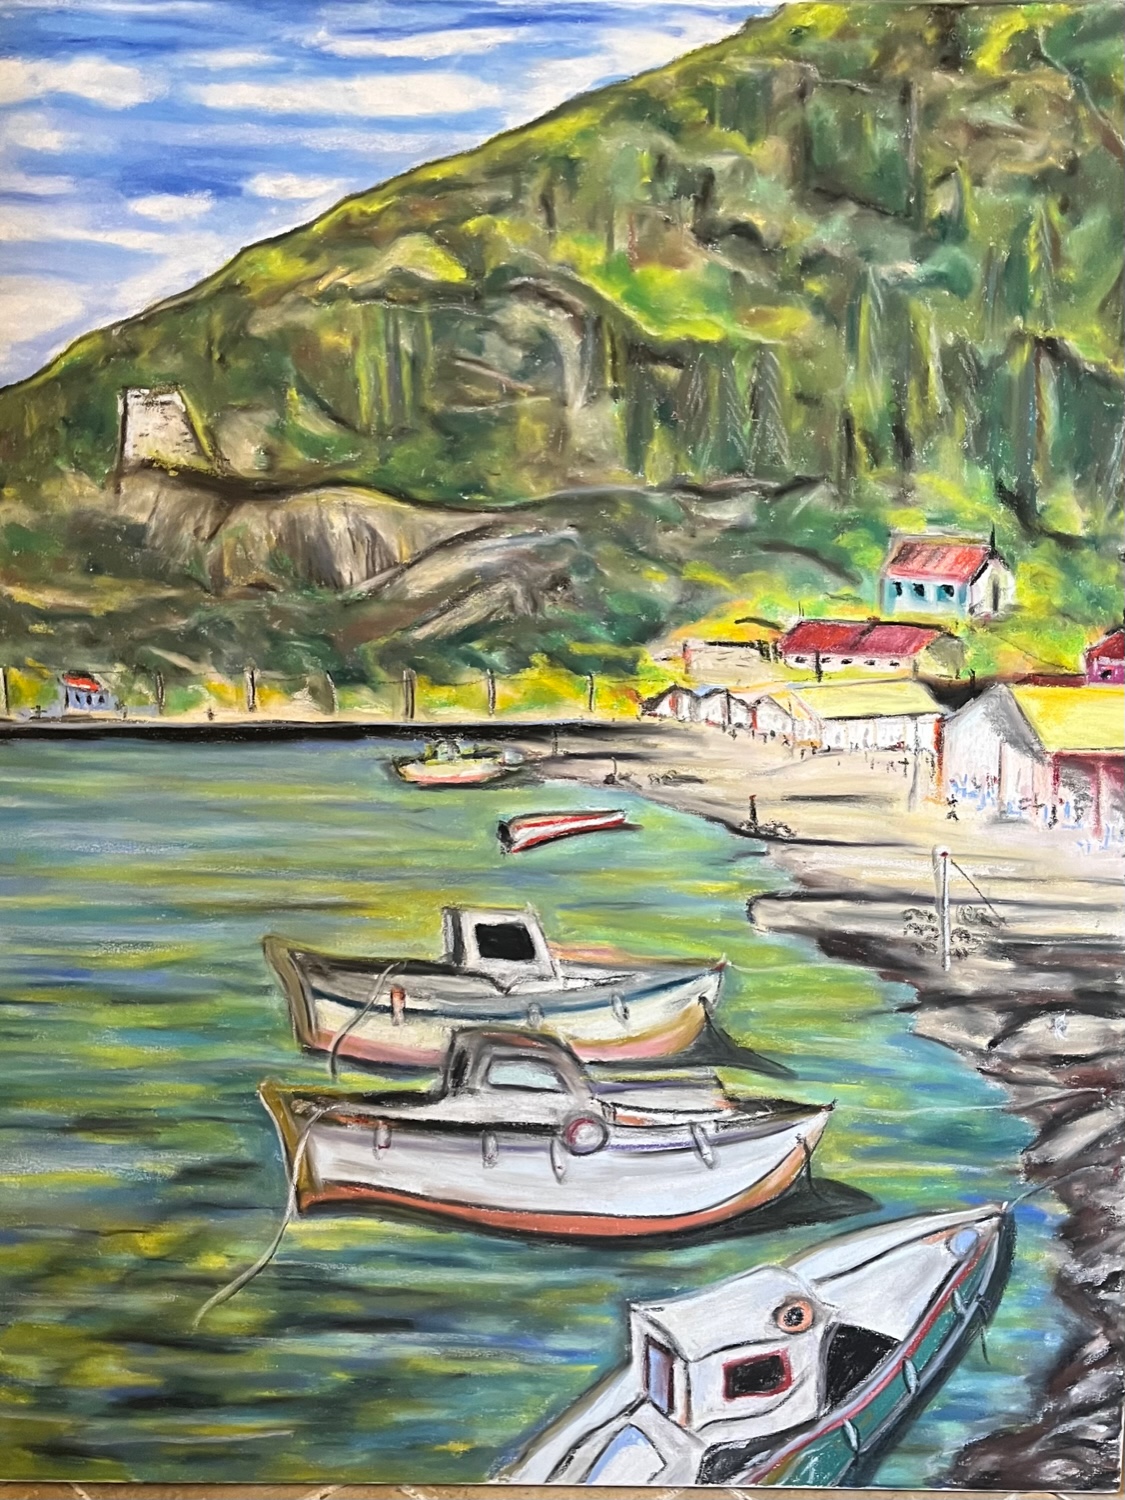 Ithica Frikes harbour / Latest News / Art-amis